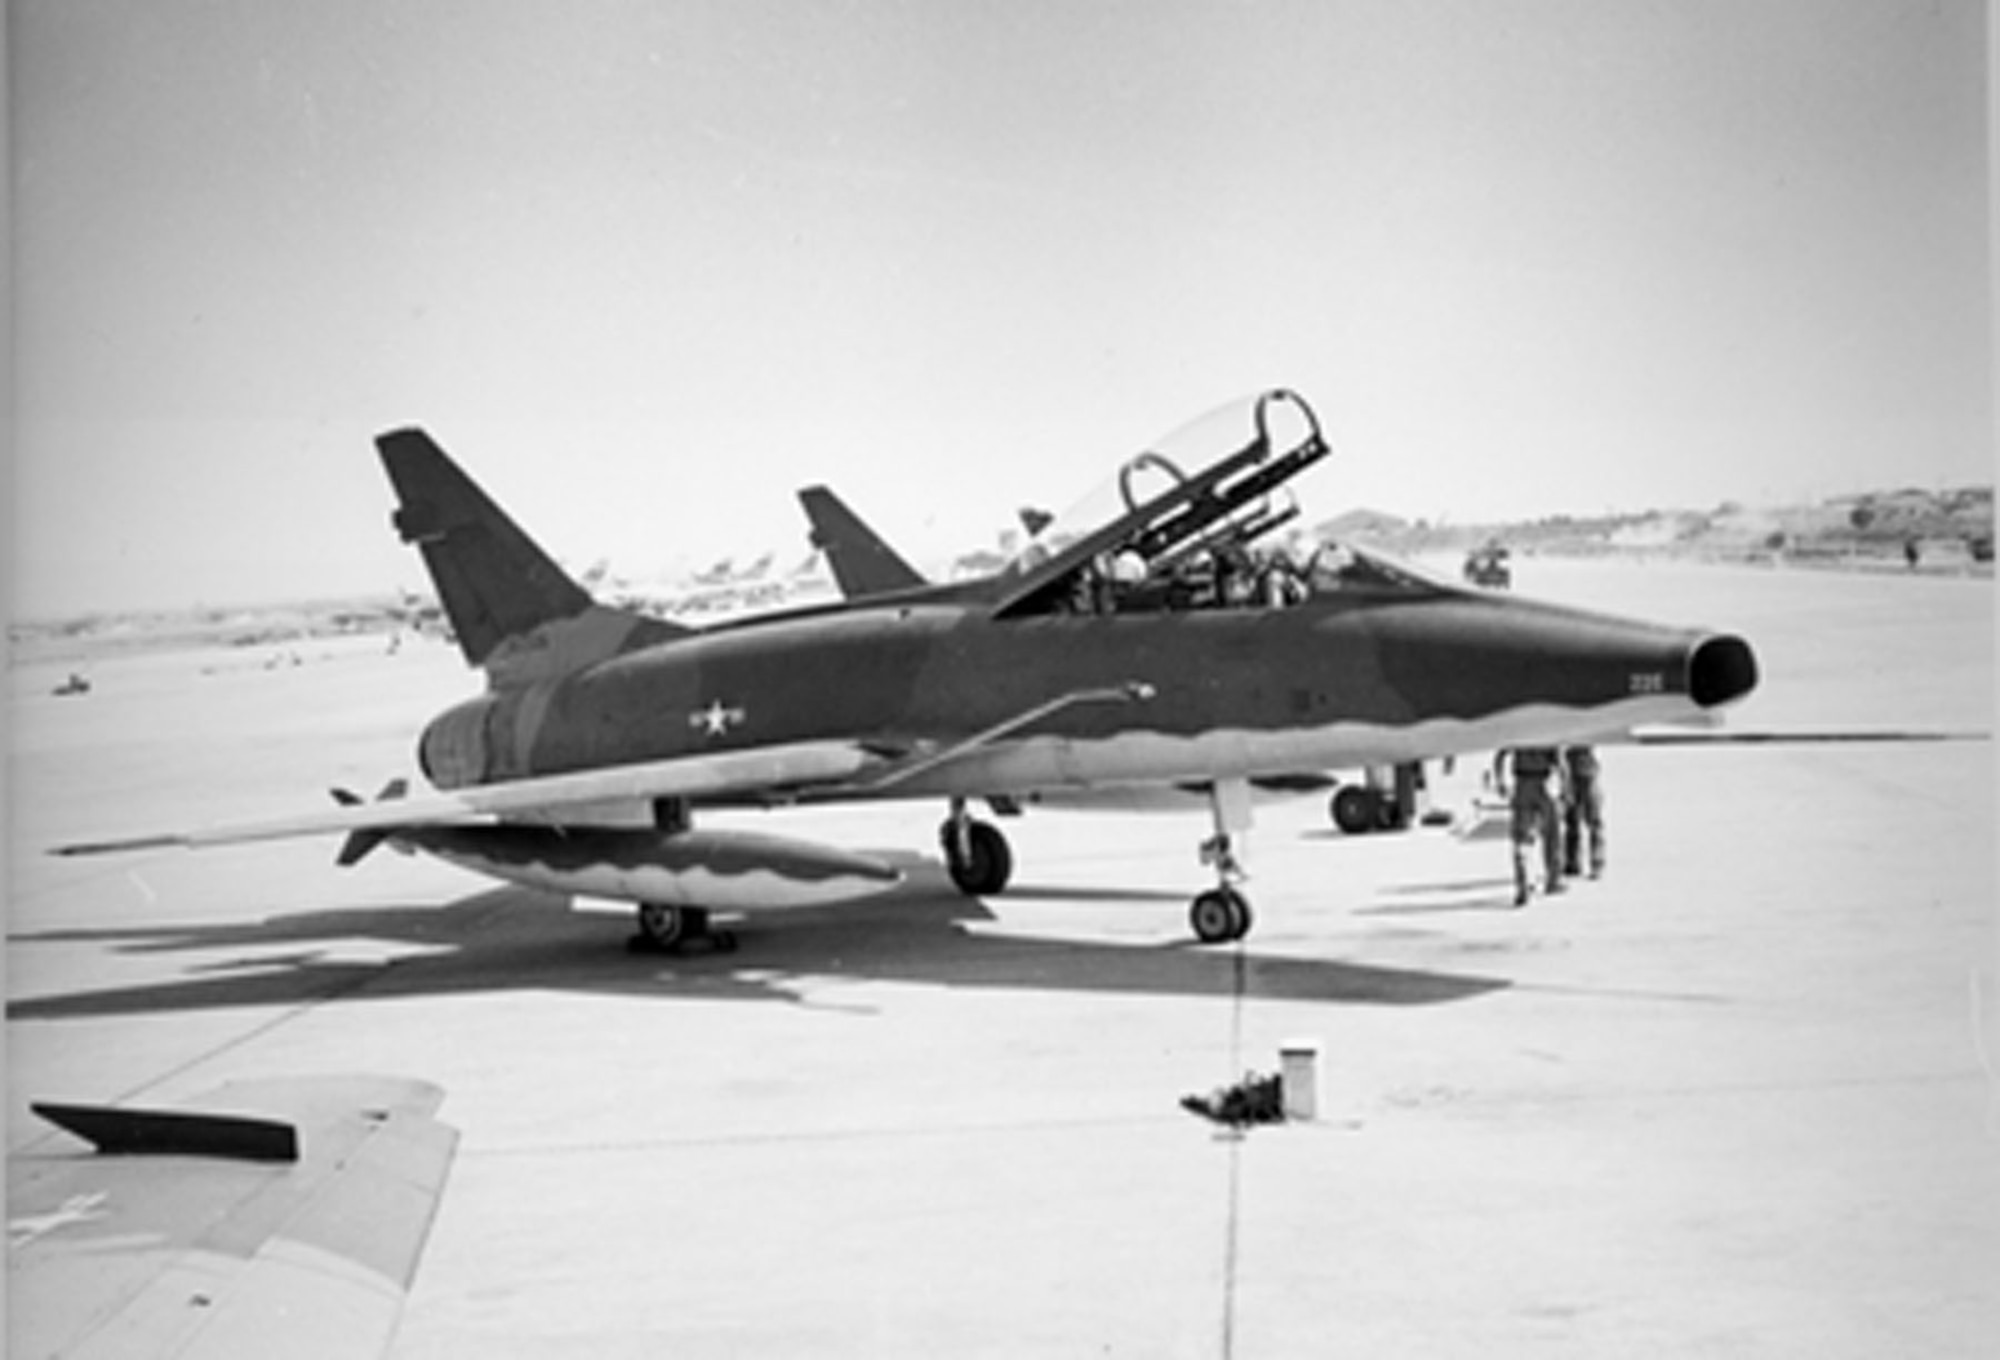 F-100F used by Lamb and Donovan on the first kill. (U.S. Air Force photo)